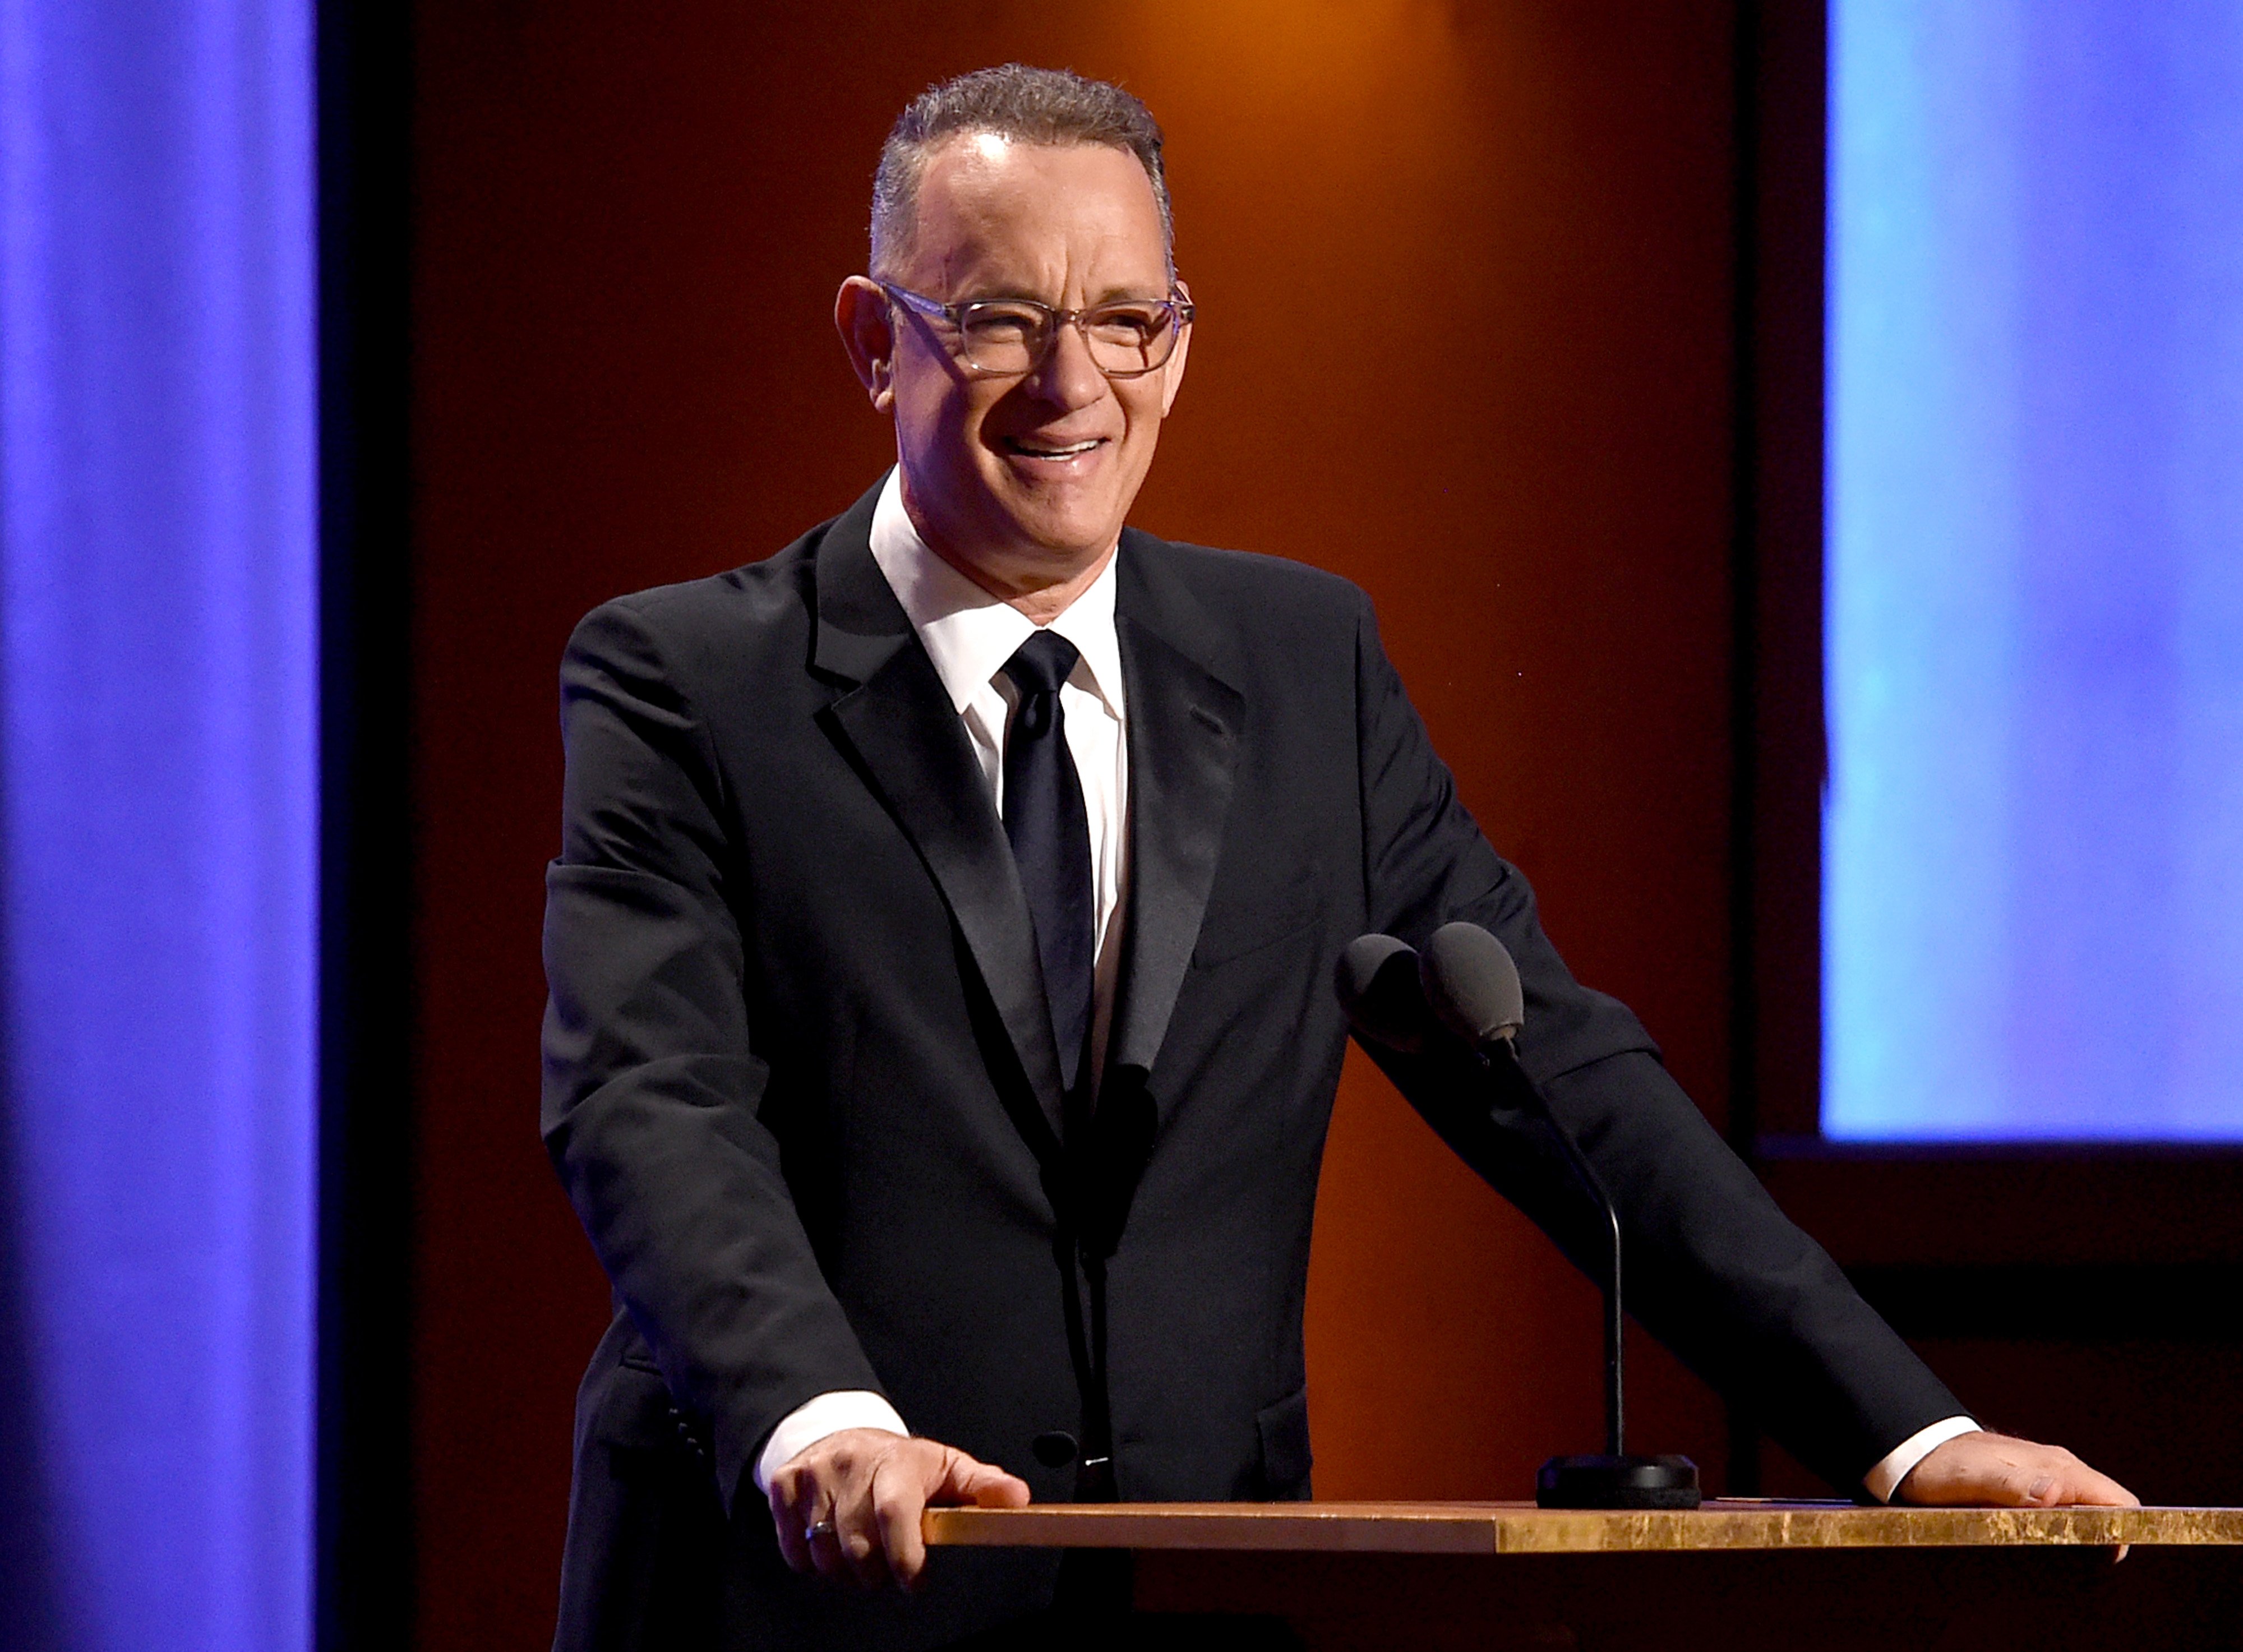 Tom Hanks speaking onstage during the Academy of Motion Picture Arts and Sciences' 10th annual Governors Awards at The Ray Dolby Ballroom at Hollywood & Highland Center in Hollywood, California | Photo: Kevin Winter/Getty Images